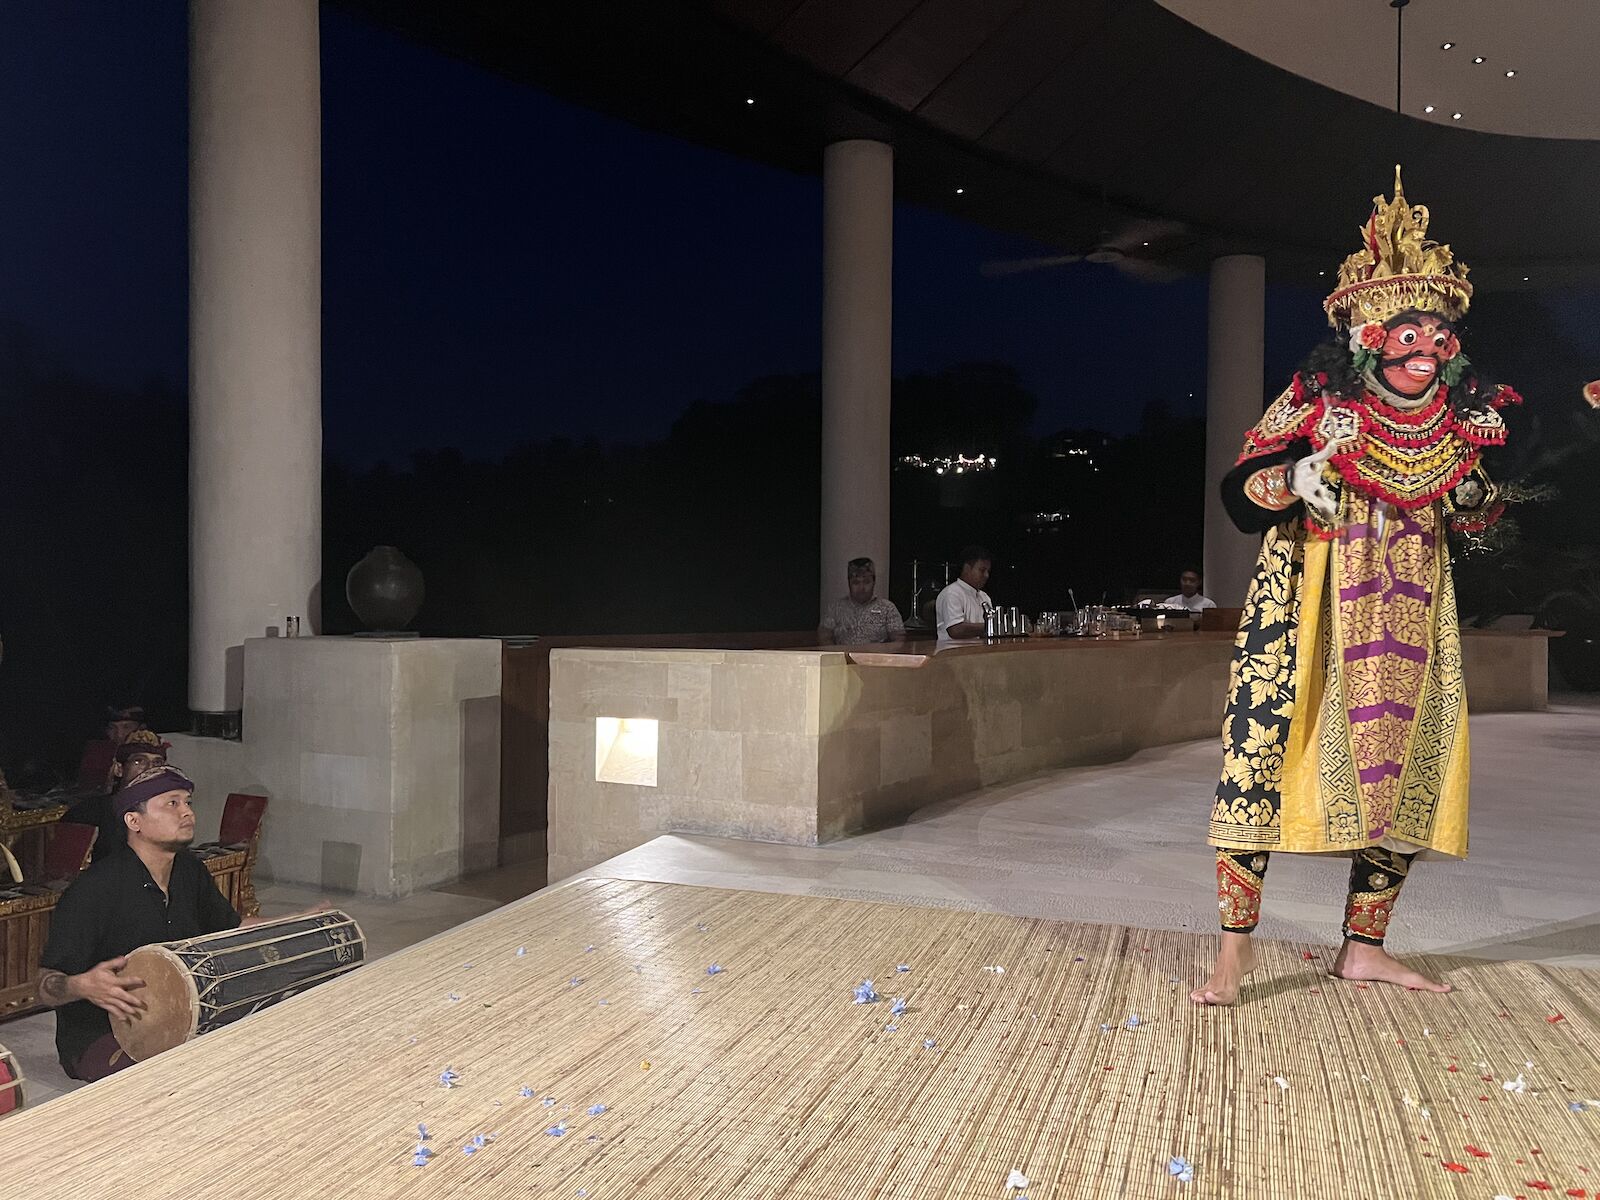 traditional performance and dance at the four seasons bali